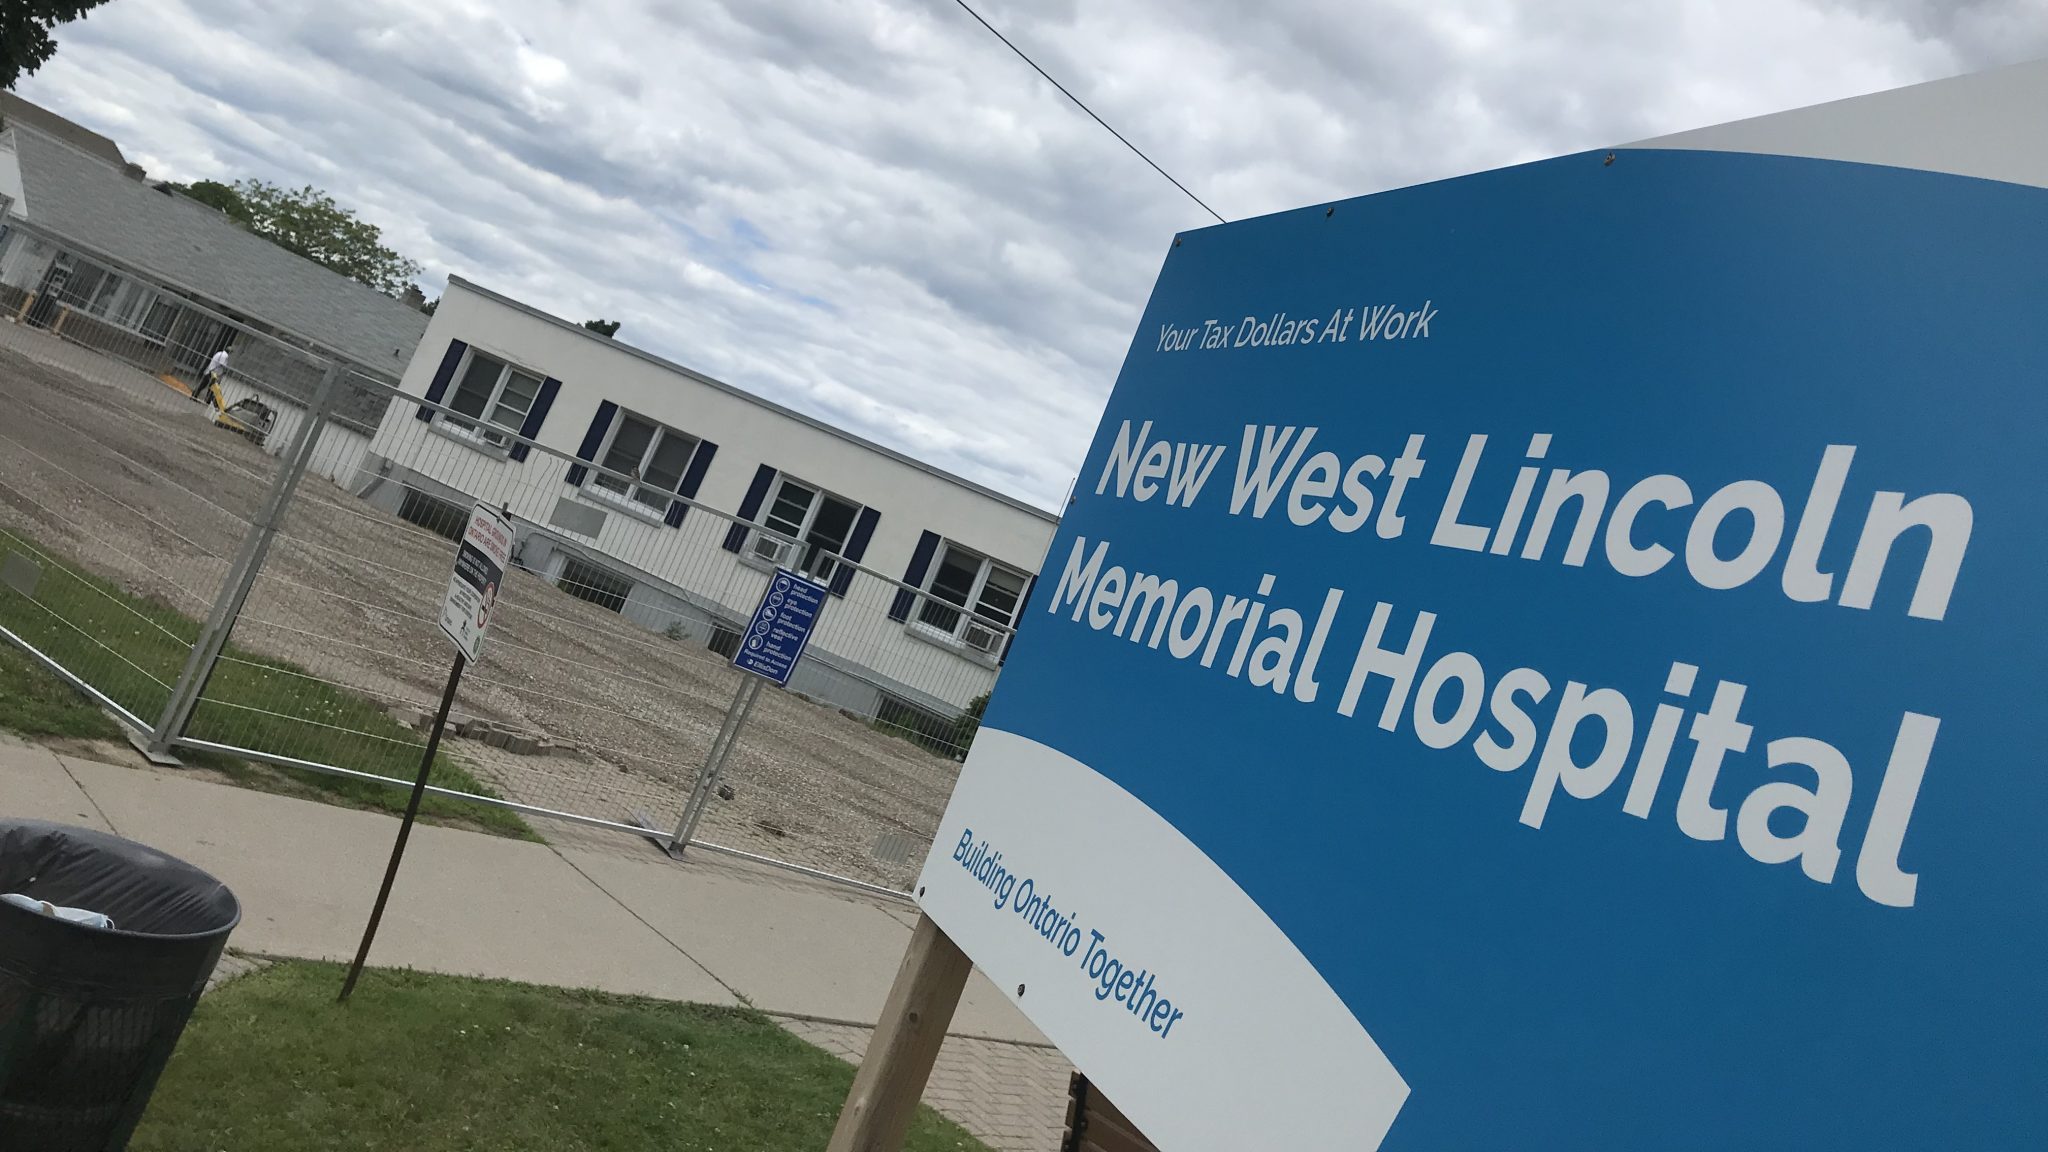 Signage outside W L M H reading New West Lincoln Memorial Hospital